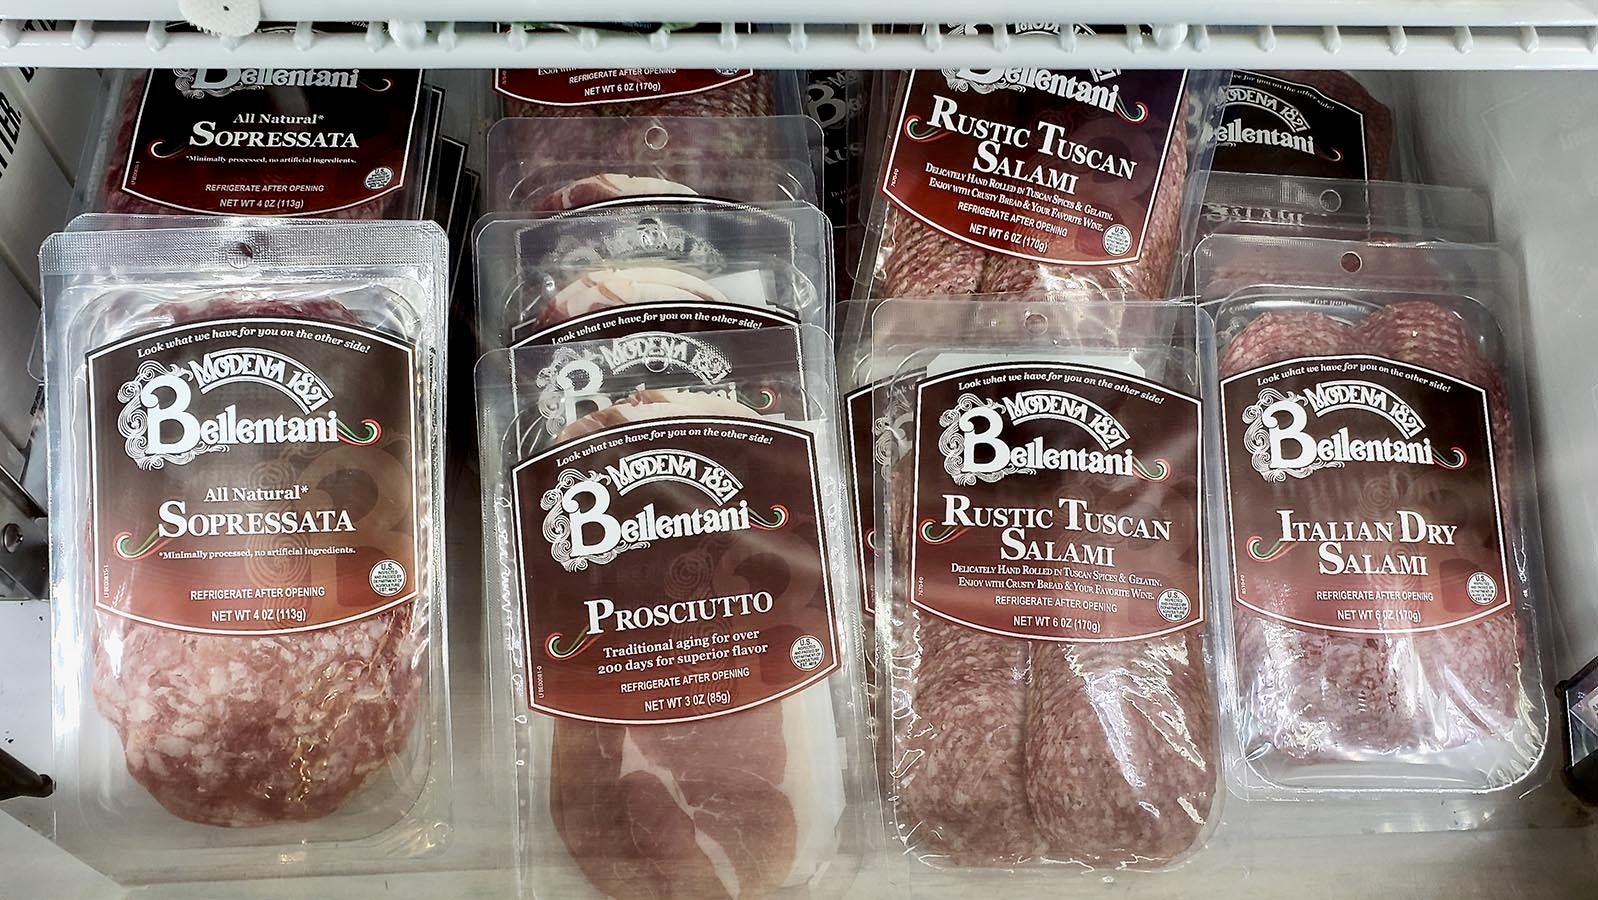 Cured meats perfect for picnic charcuterie from Grant Street Grocery.